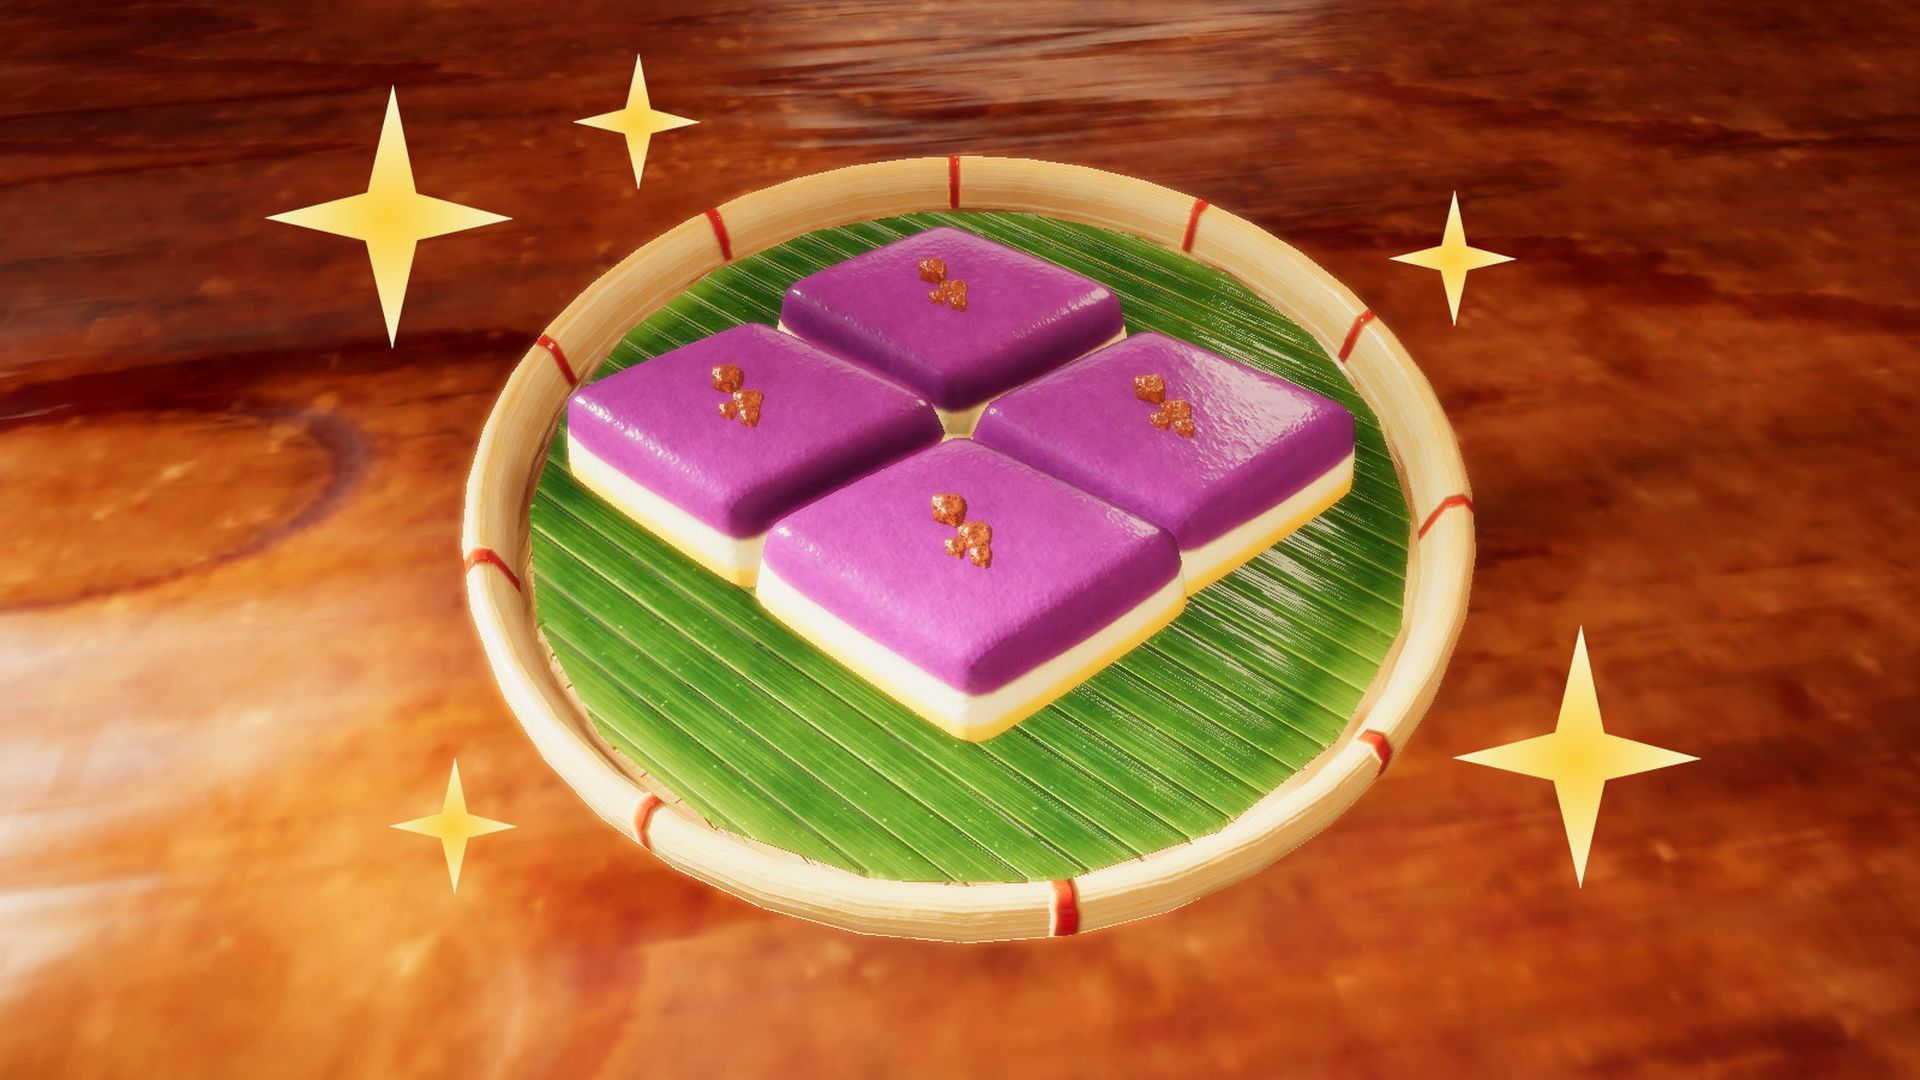 Image of a food game